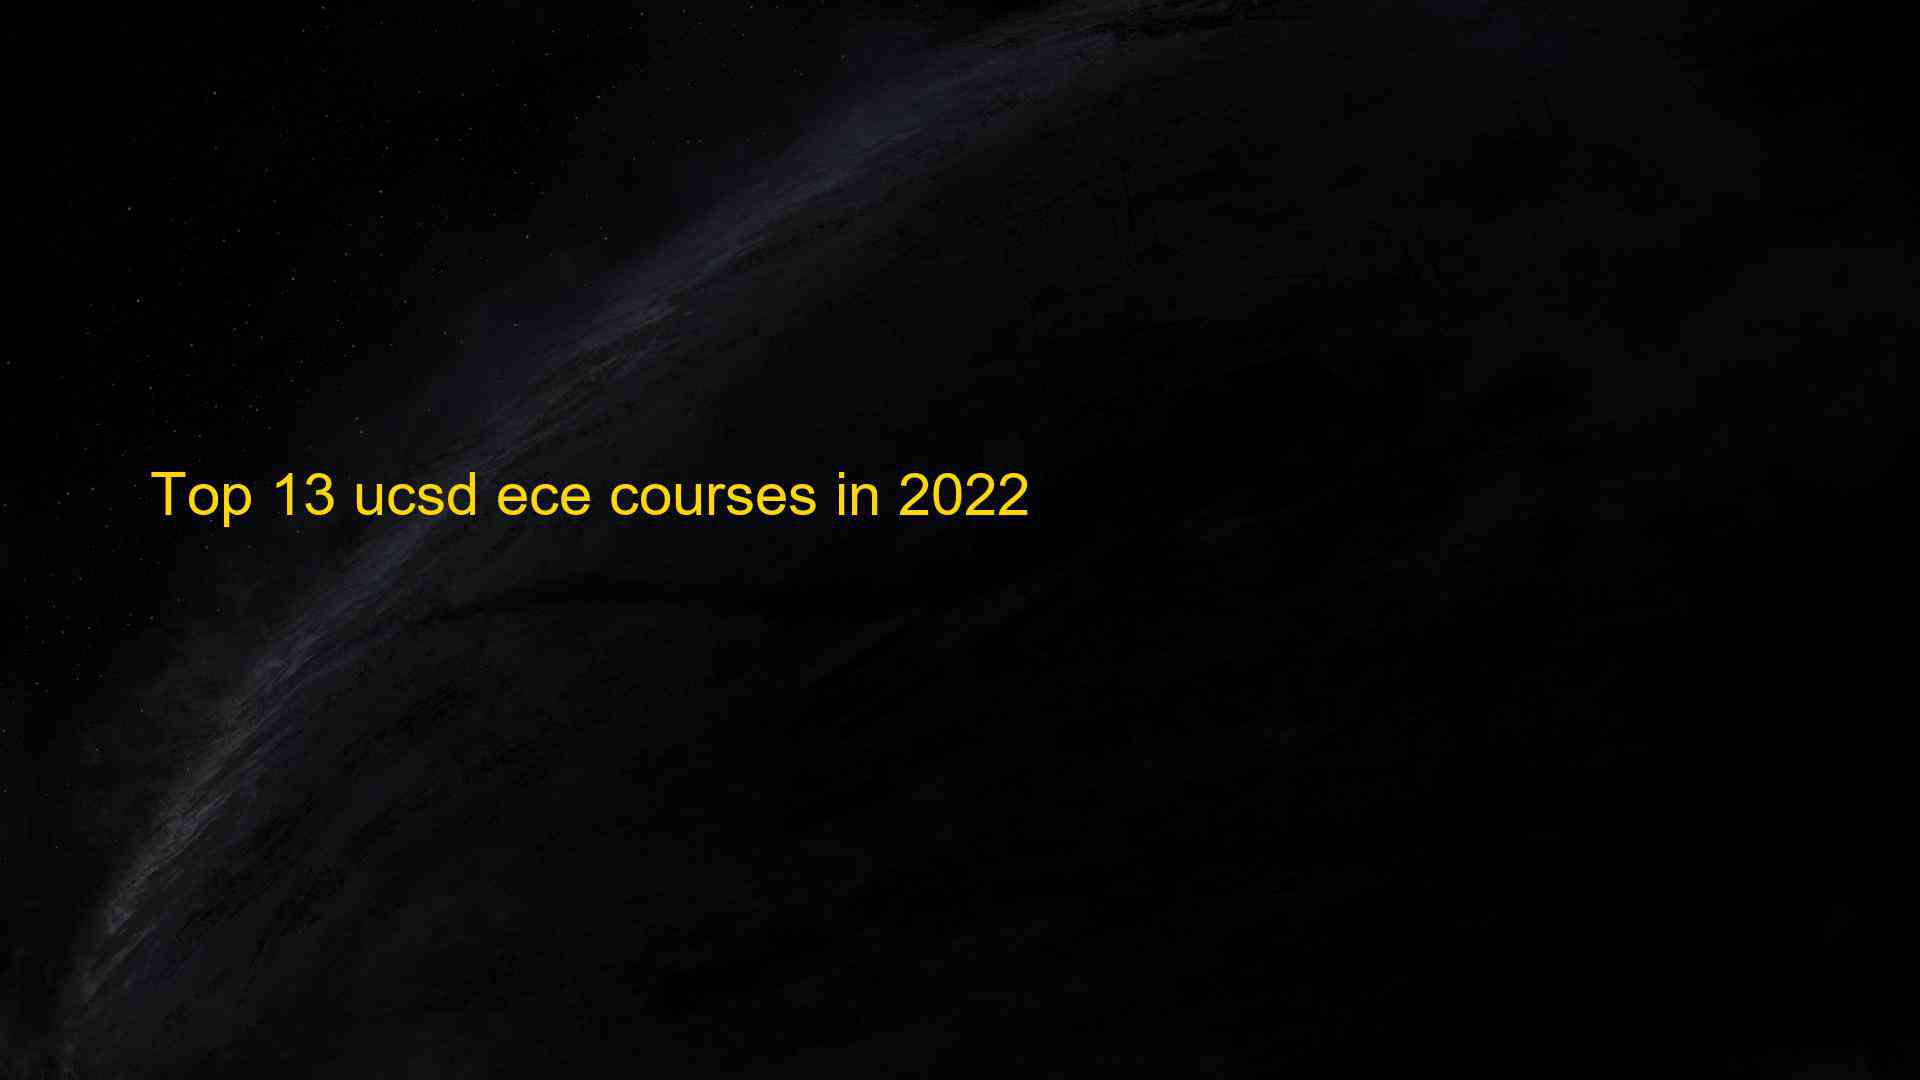 Top 13 ucsd ece courses in 2022 1660872325